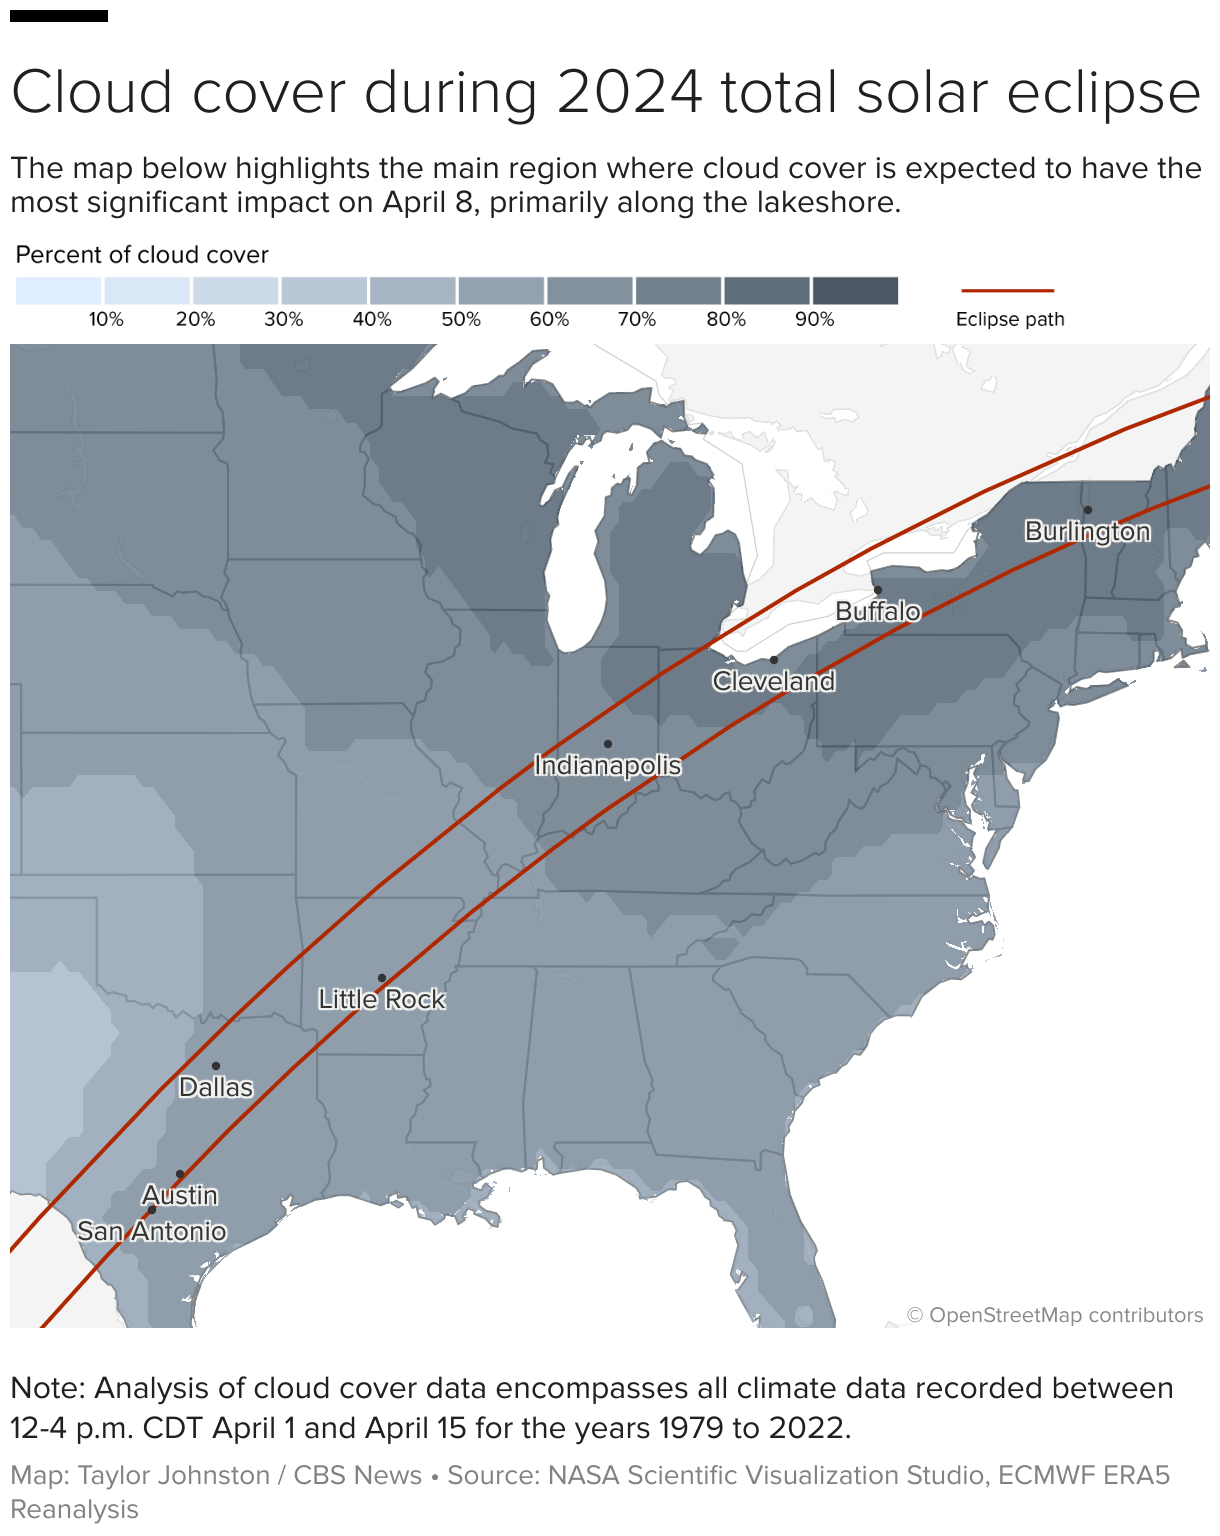 A map of the United States showing the percentage of cloud cover in different areas of the eclipse path on April 8.  The lakeside area will be mainly affected. 